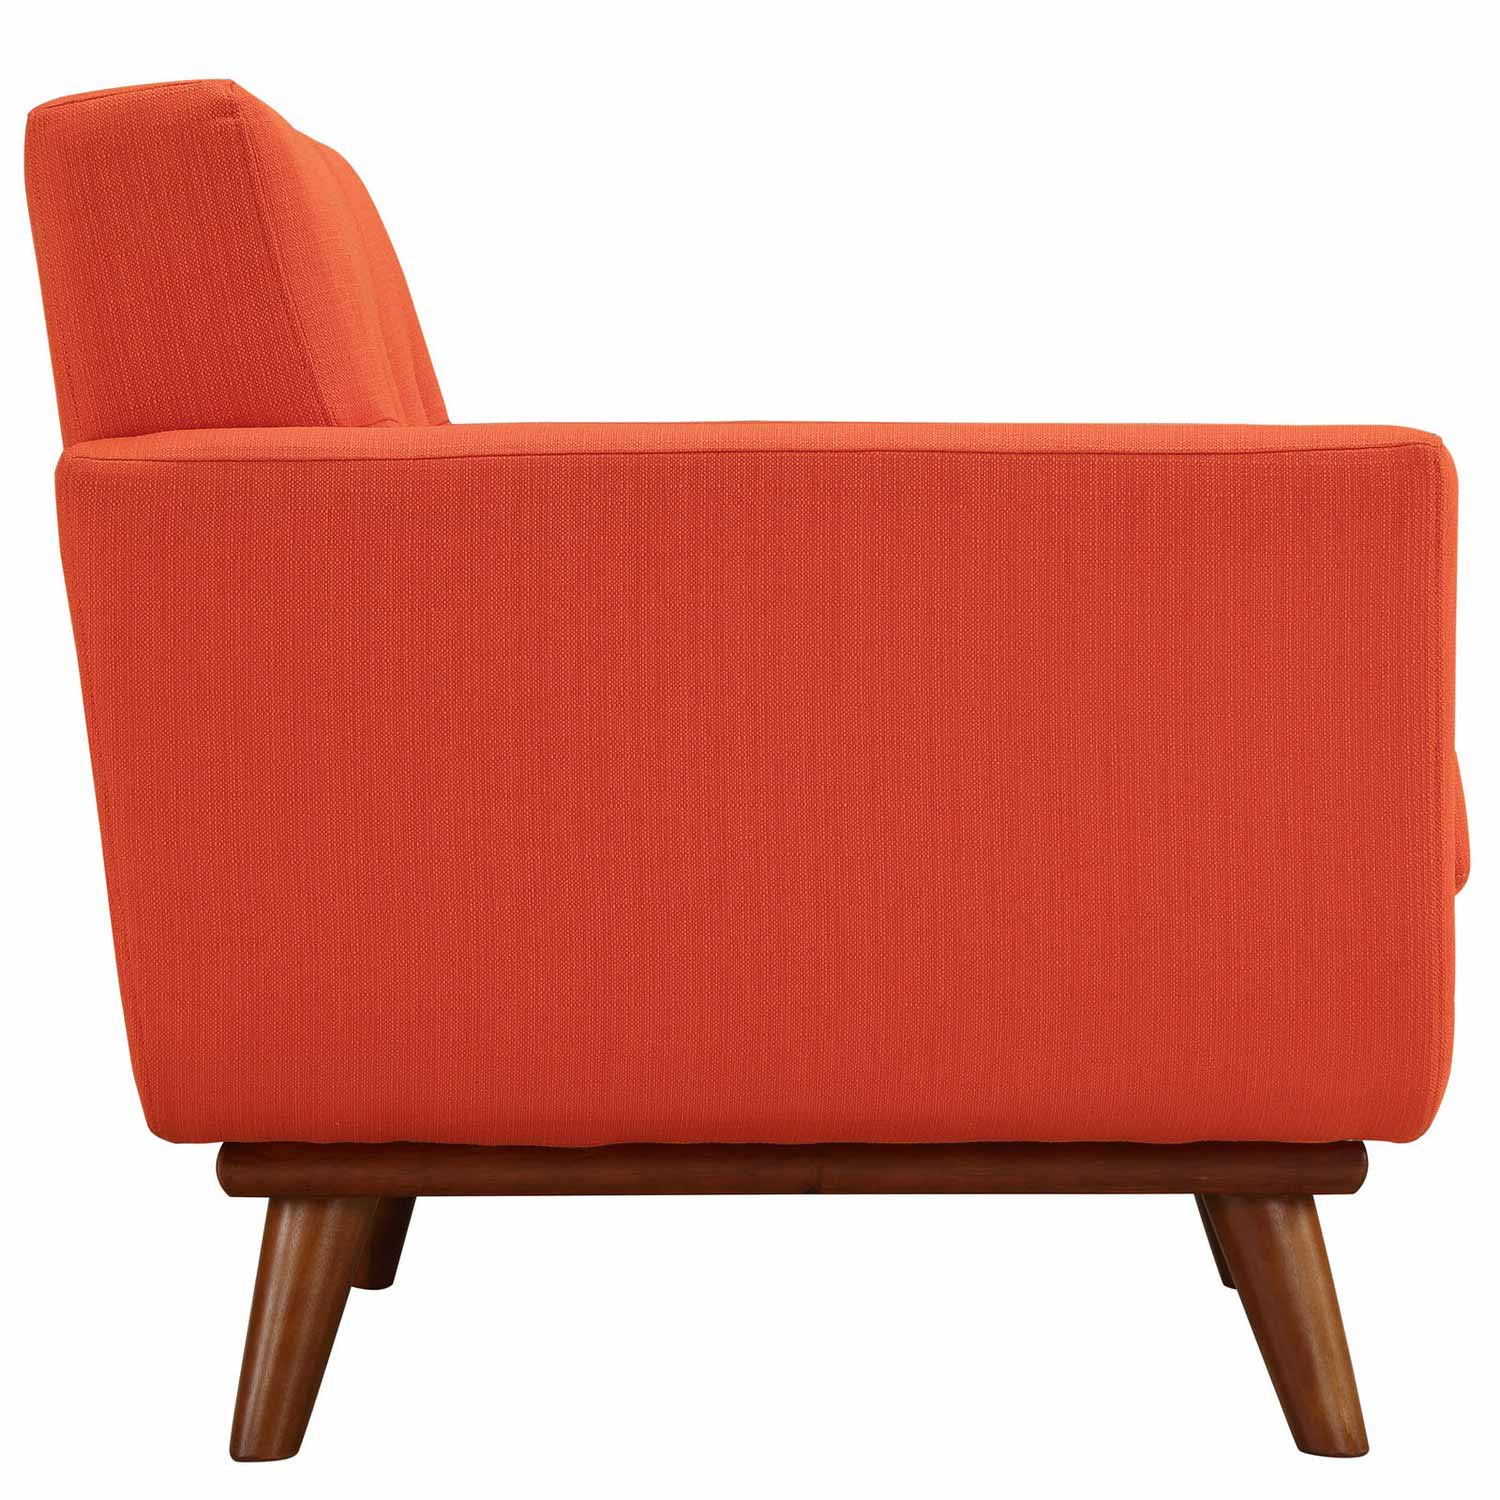 Modway Engage Armchair and Loveseat Set of 2 - Atomic Red